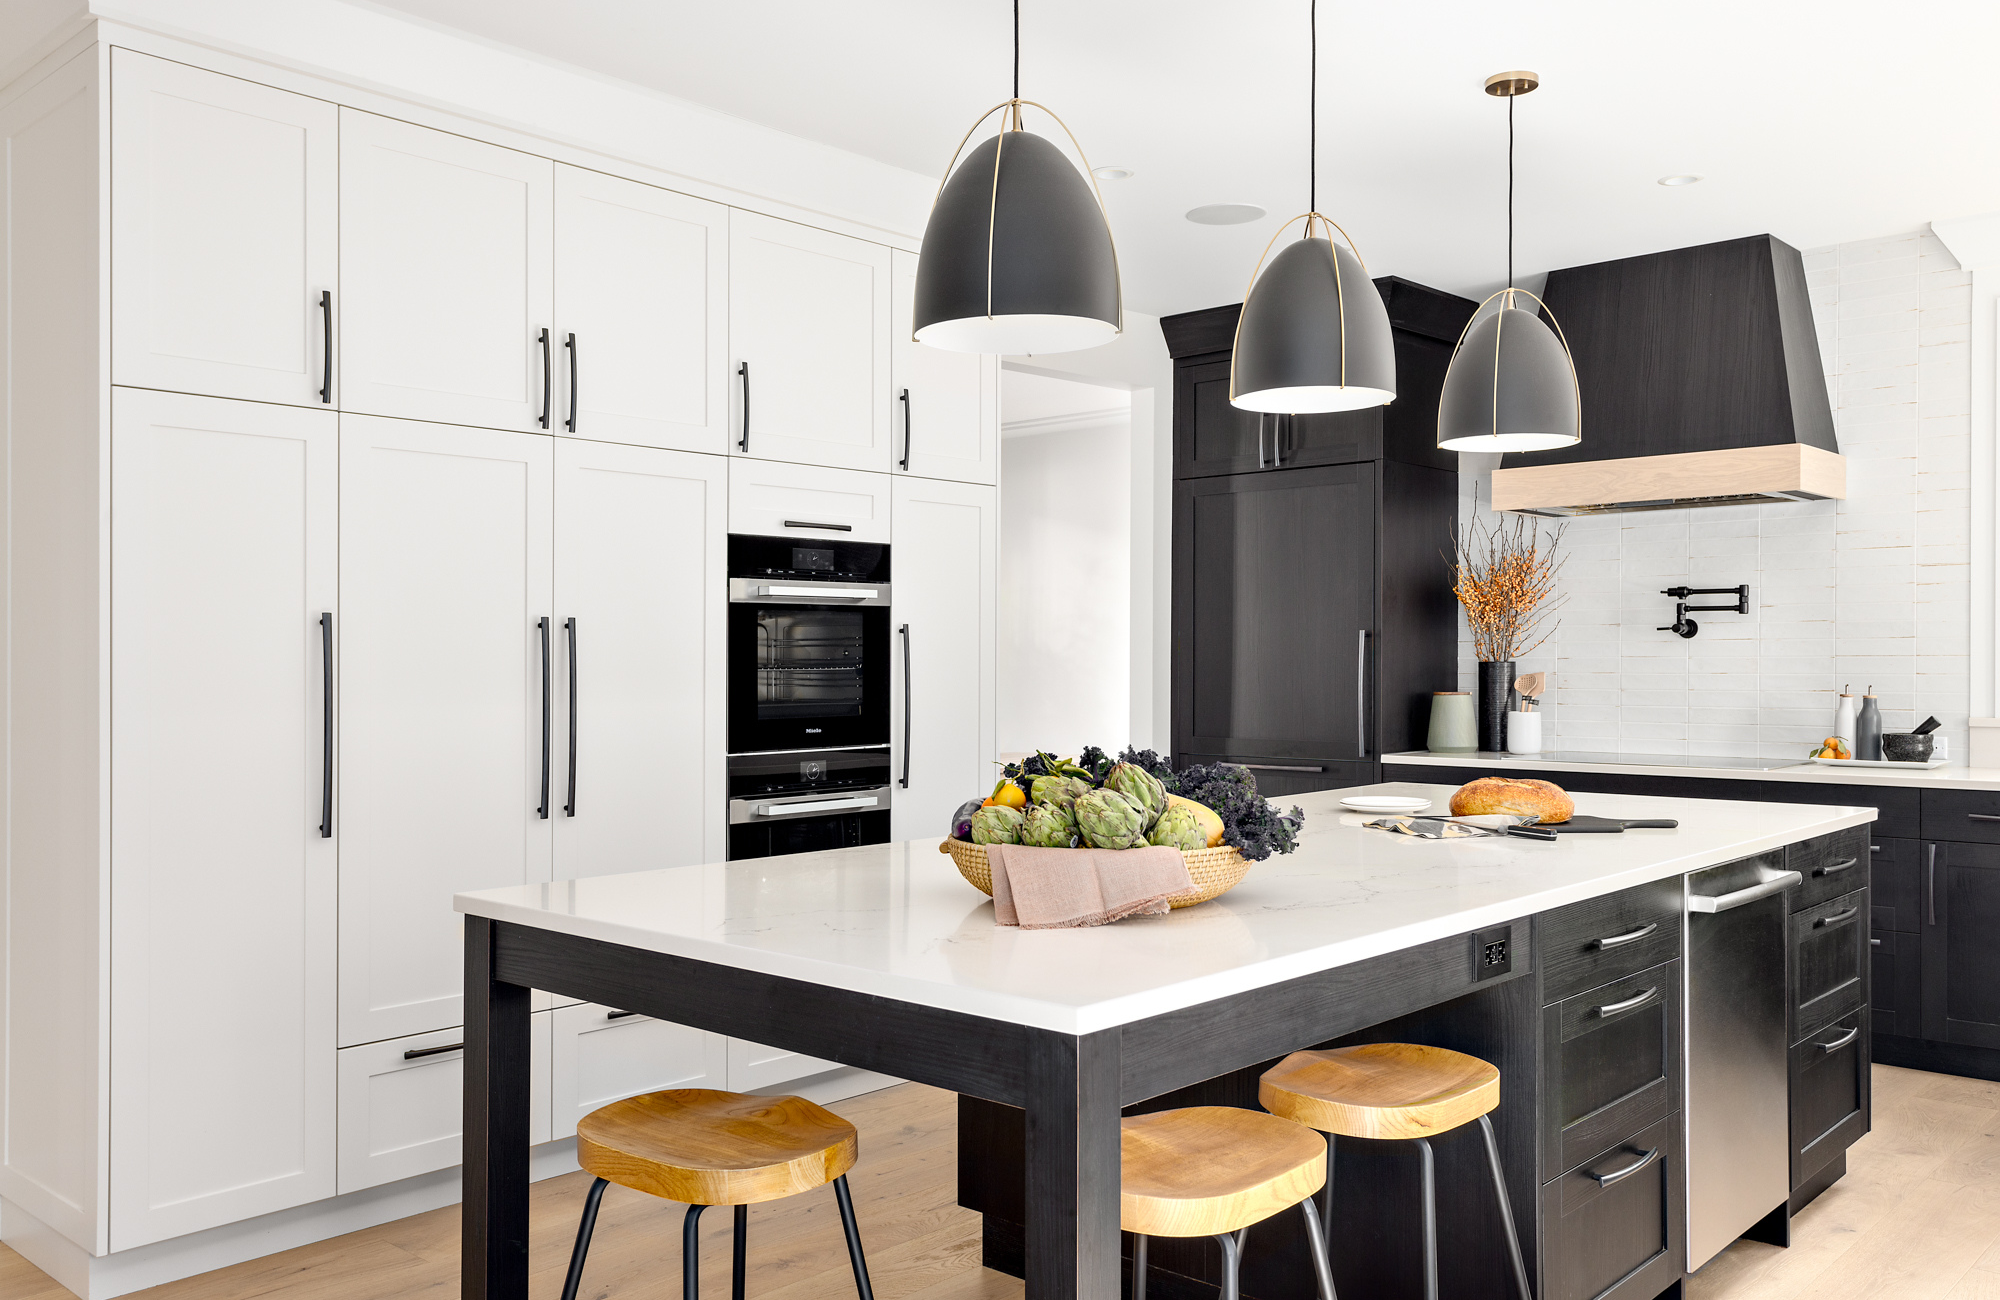 Simply Home-larkhall-north-vancouver-kitchen-modern-black-double oven-cabinets-island-dishwasher-white